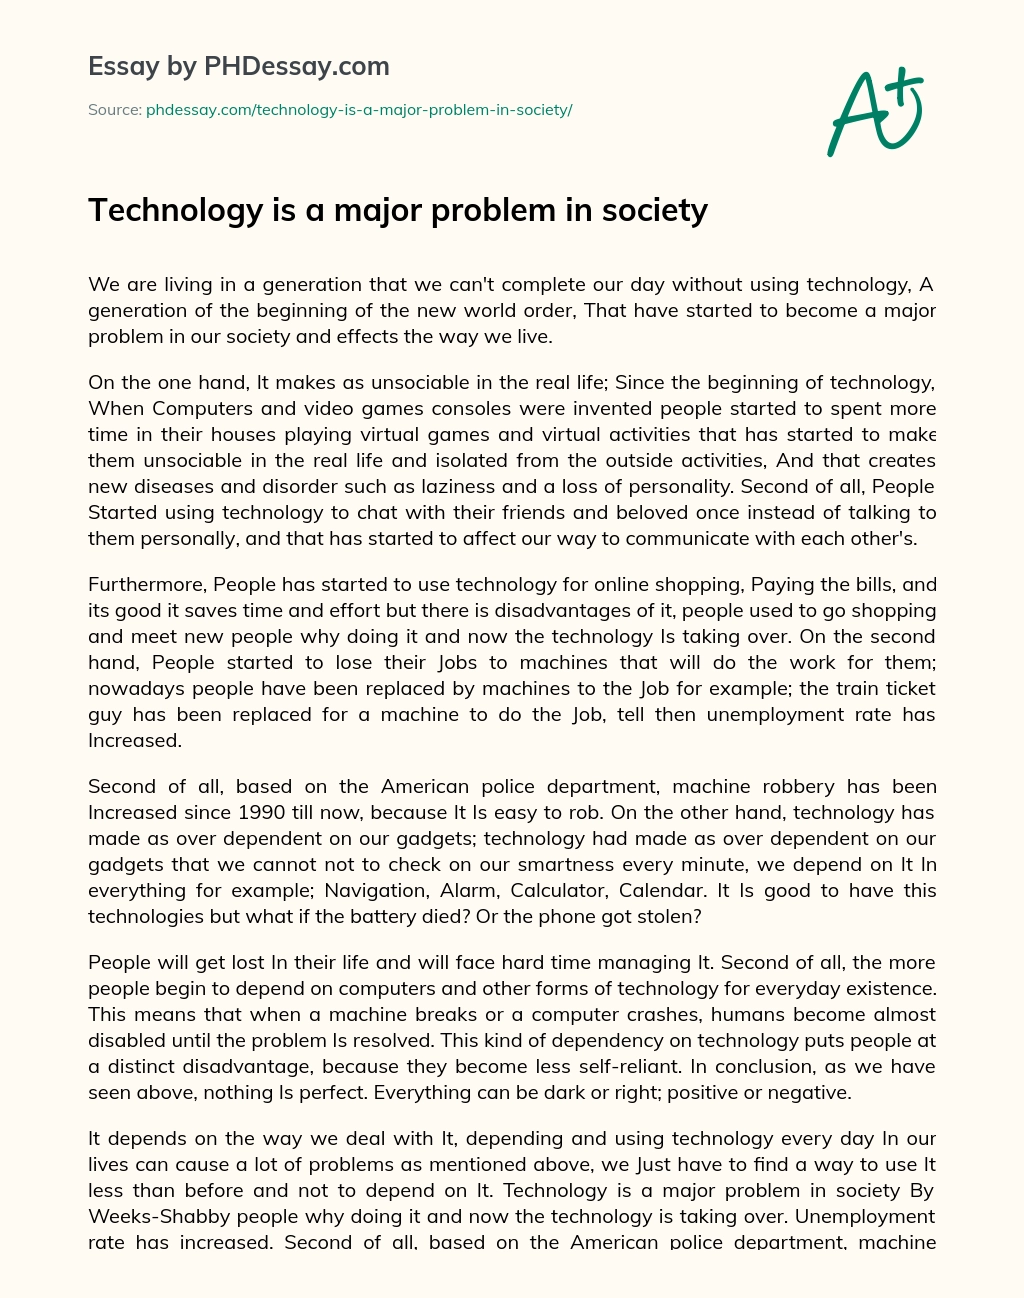 Technology is a major problem in society essay